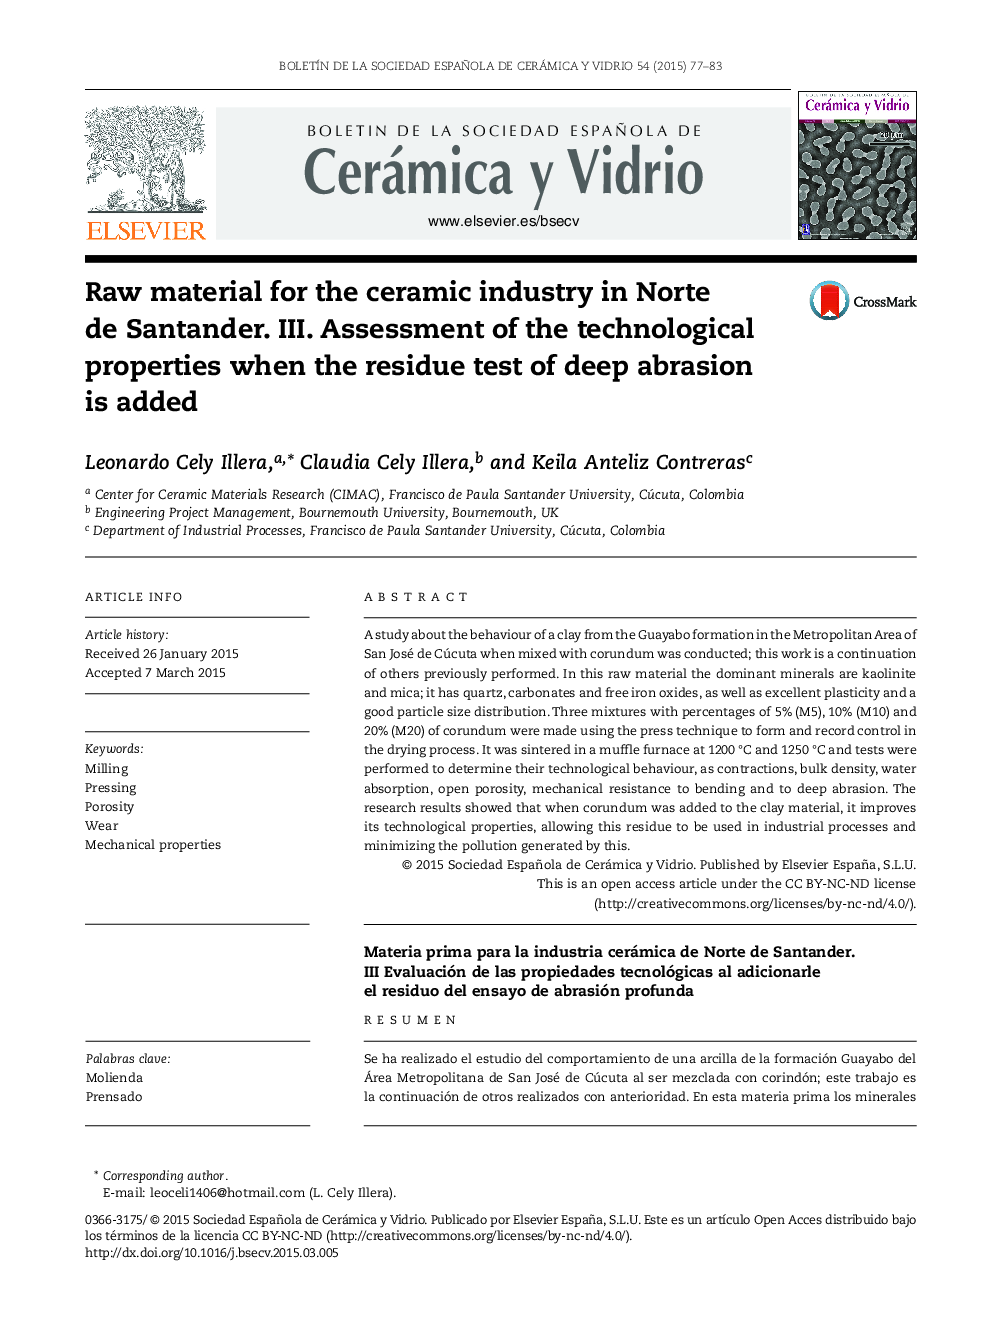 Raw material for the ceramic industry in Norte de Santander. III. Assessment of the technological properties when the residue test of deep abrasion is added